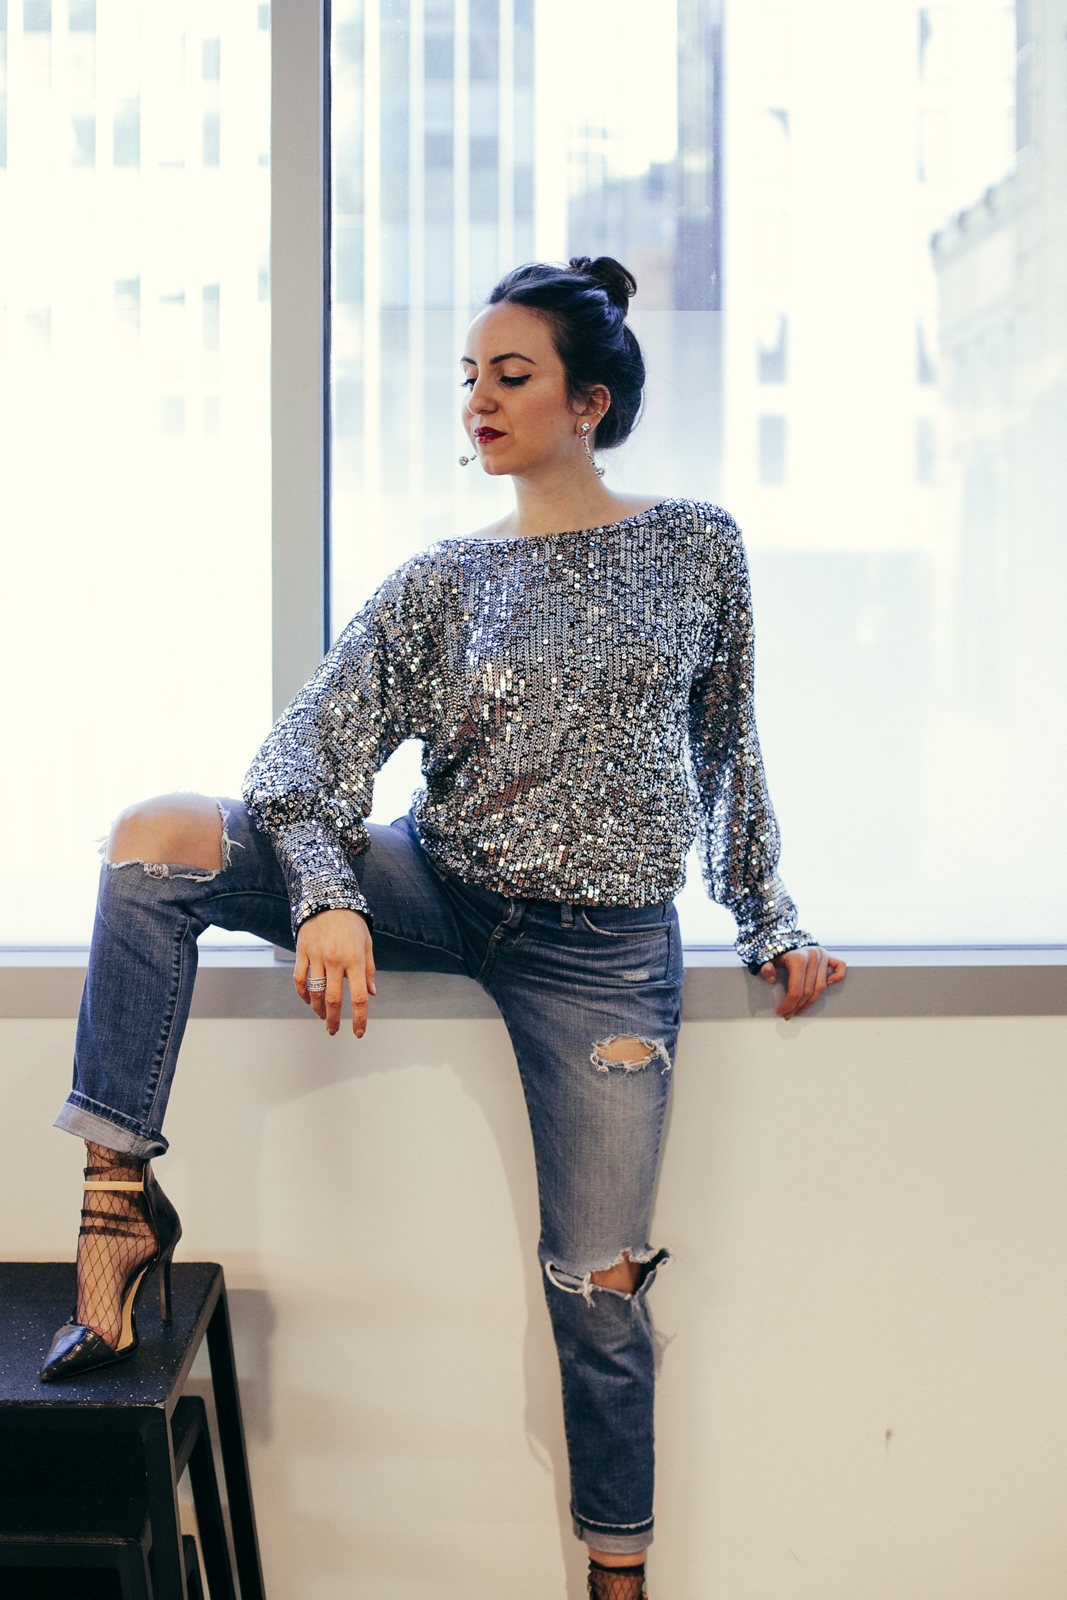 Yana Frigellis of NoMad Luxuries wearing a Trina Turk sequin top for a New Year Mantra in 2018